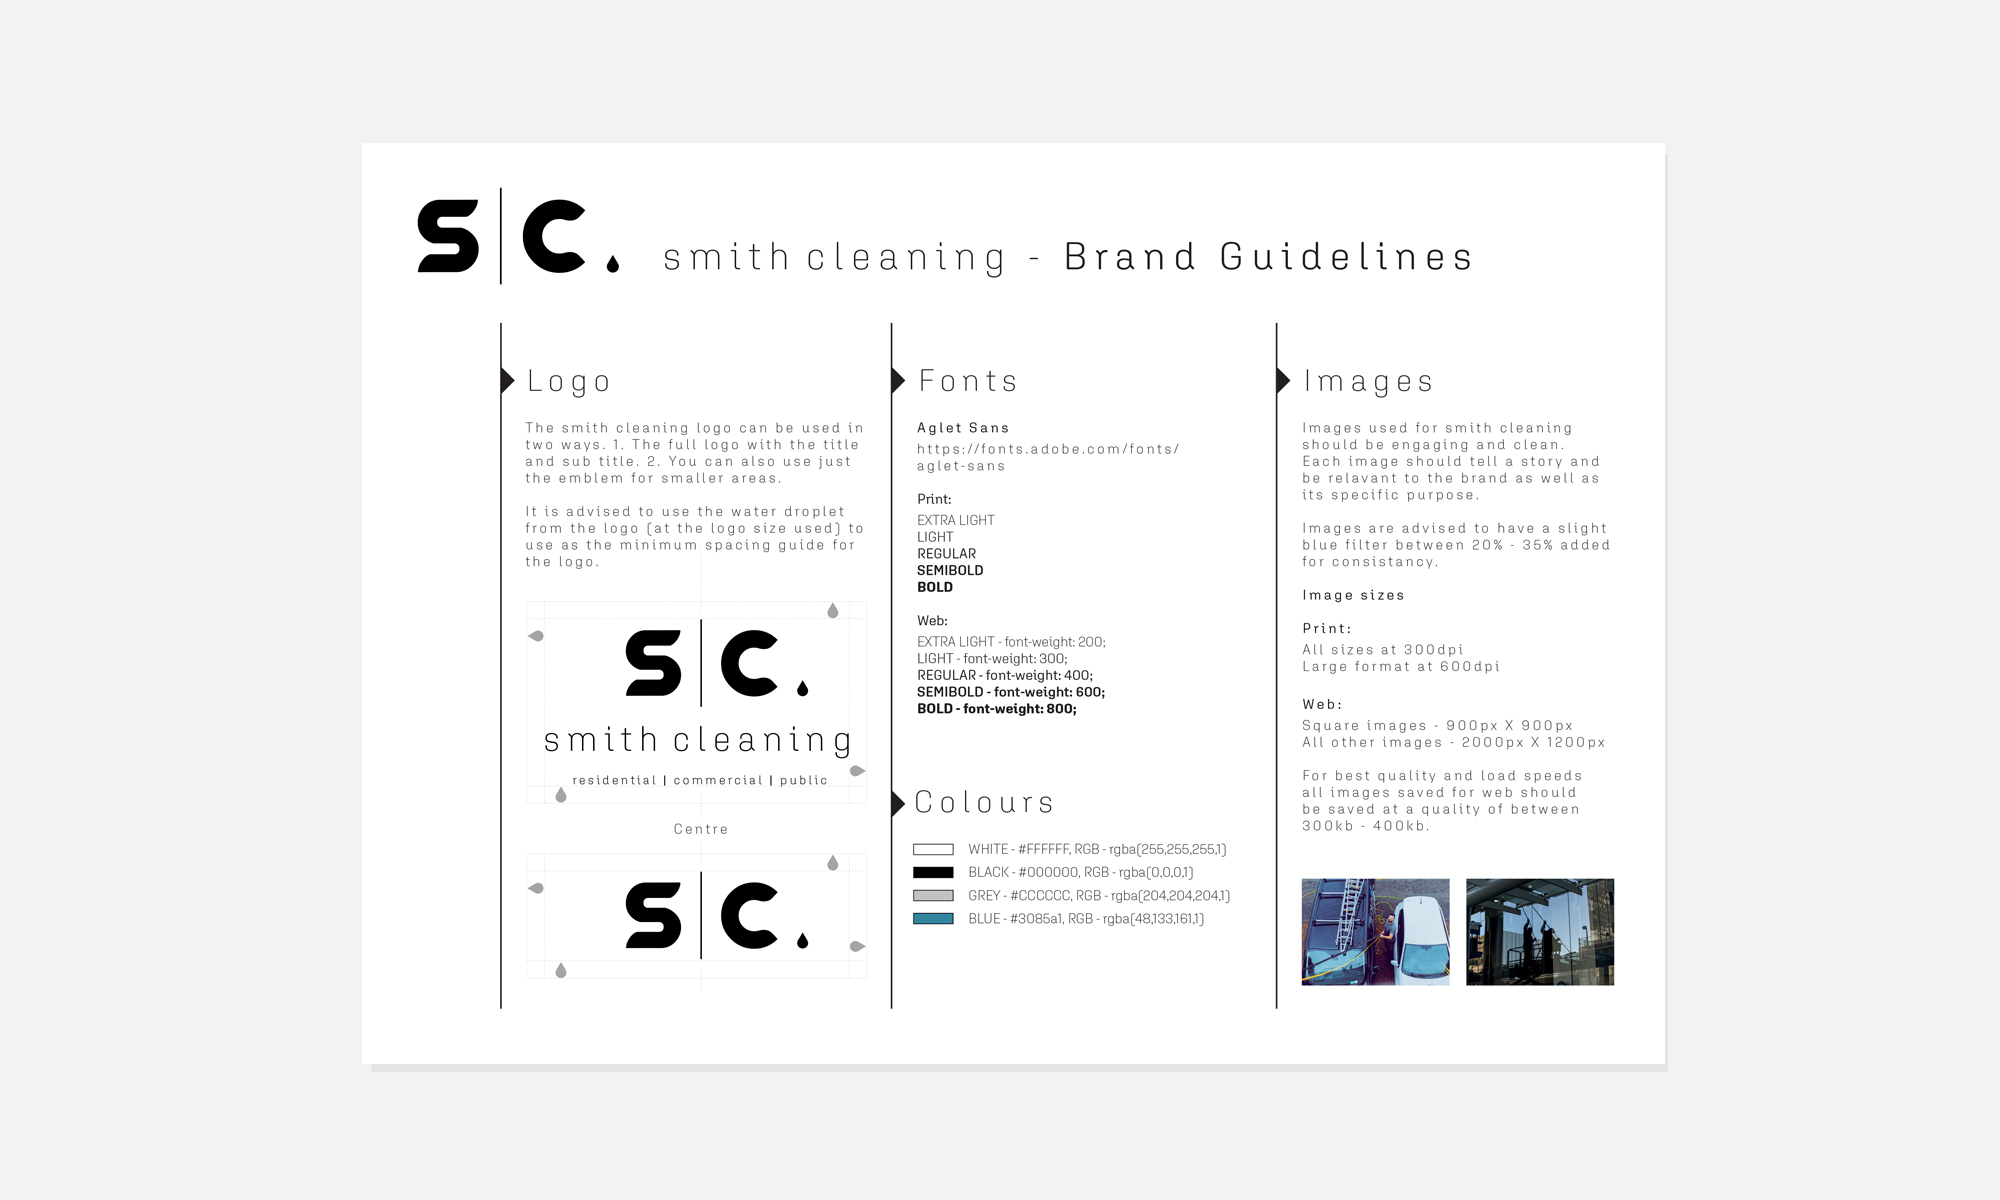 smith cleaning guidelines